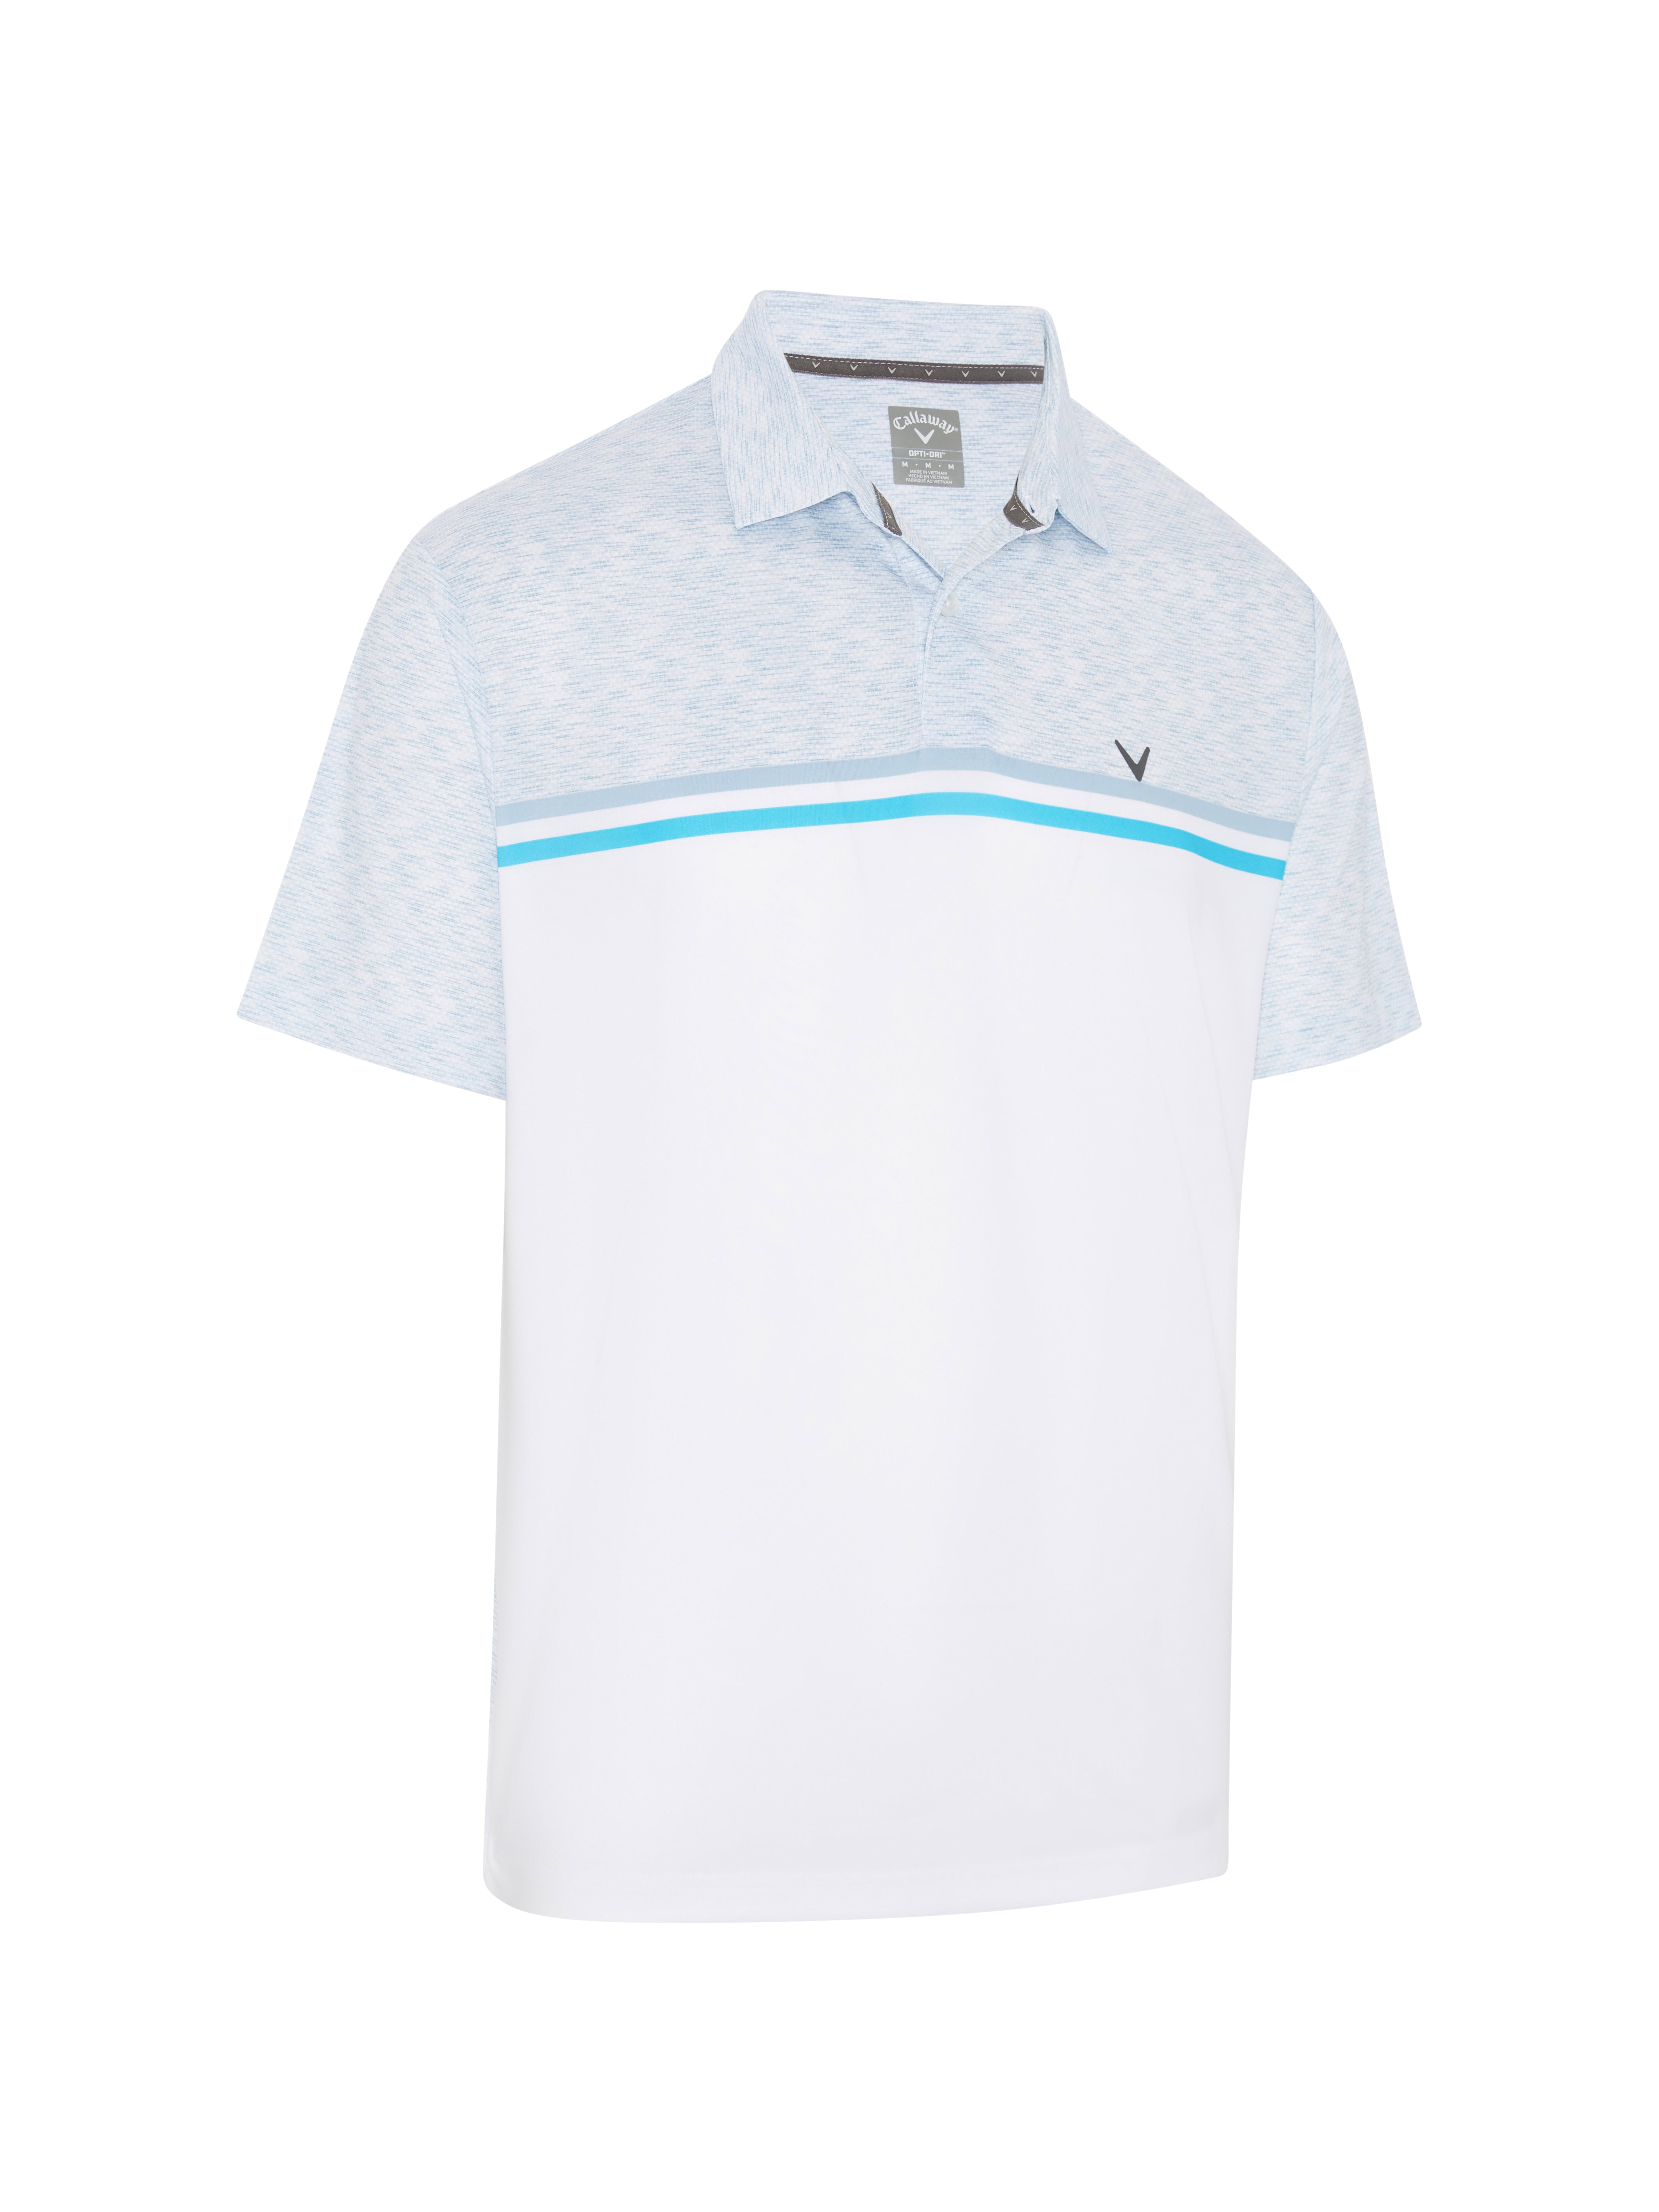 View Short Sleeve Engineered Printed Block Polo Shirt In Bright White information